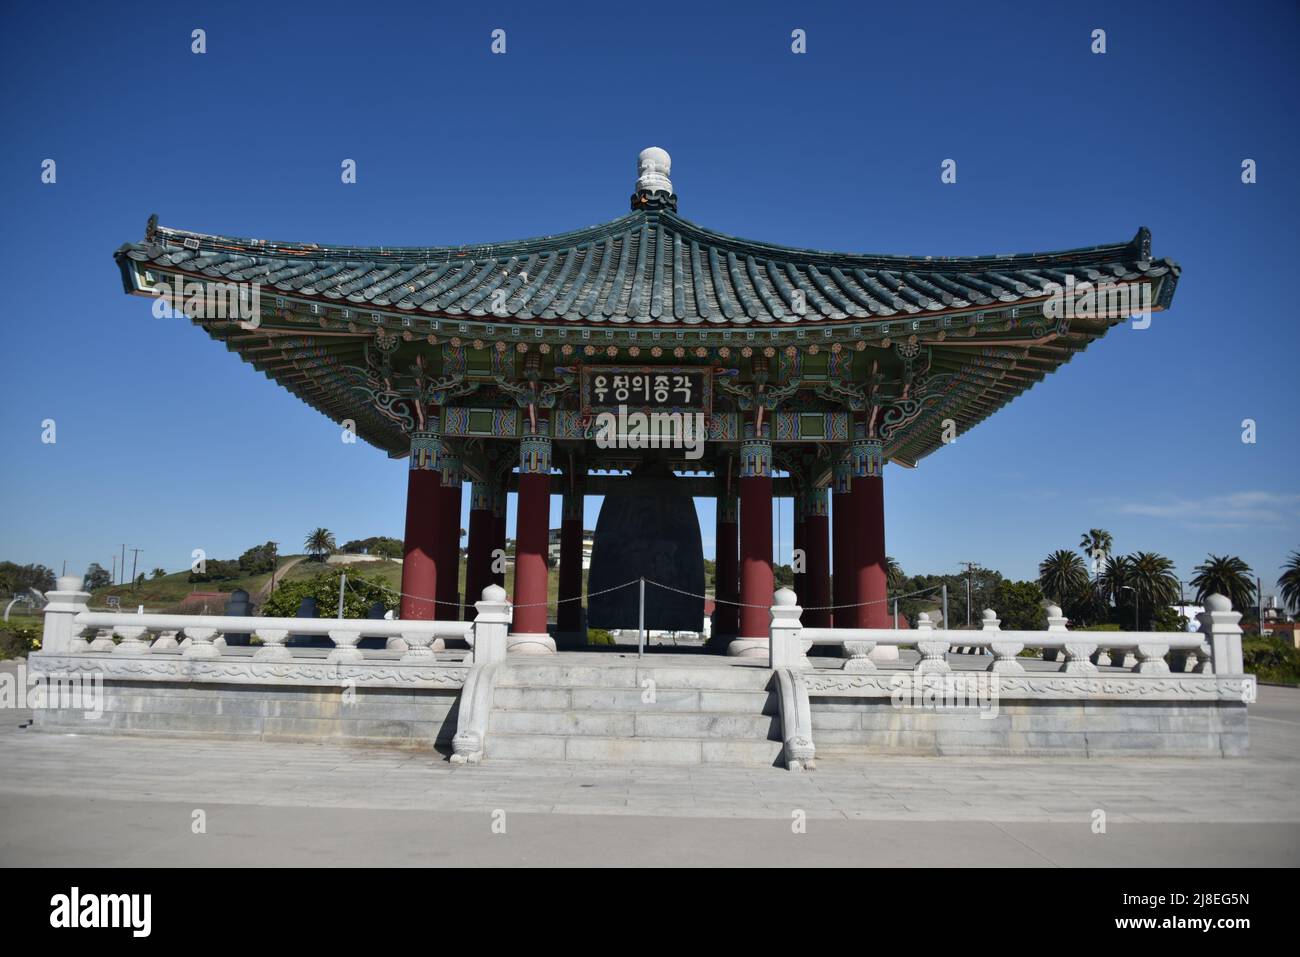 San Pedro, CA. USA 2/28/2022. Korean Friendship Bell.  Donated 1976 by the Republic of Korea to the People of Los Angeles, CA.  The bell weighs 17-ton. Stock Photo